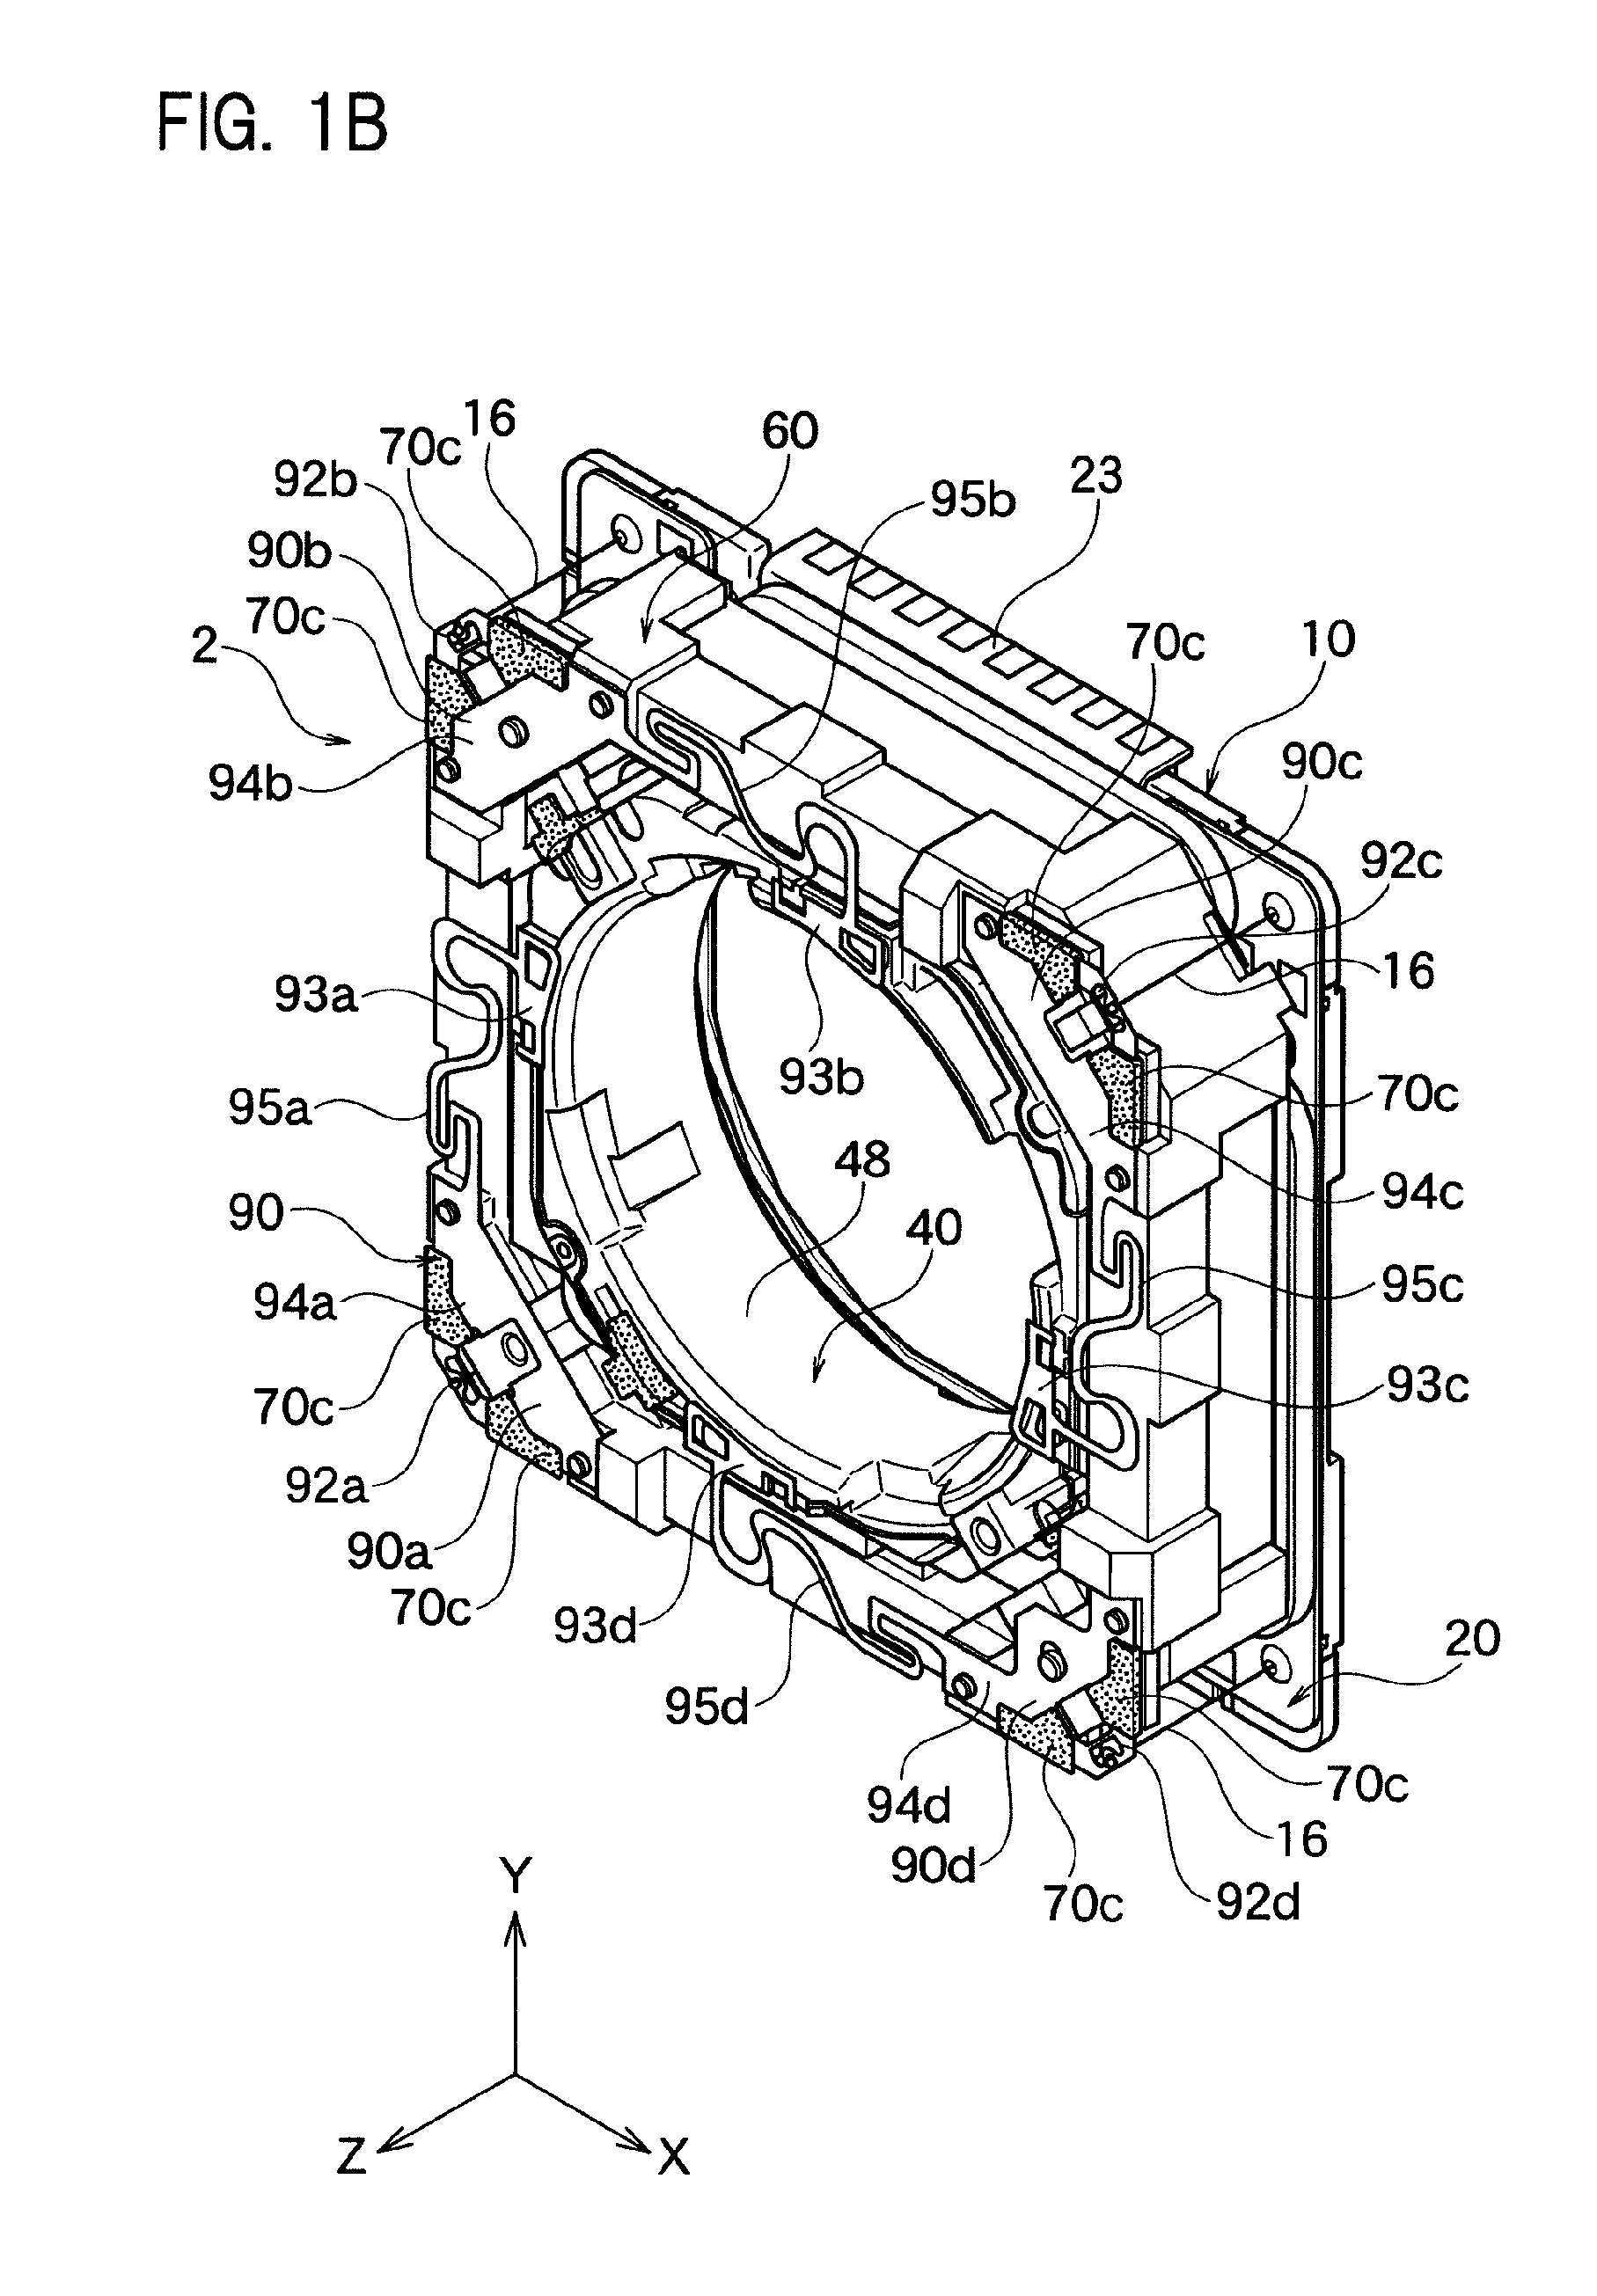 Lens driving device